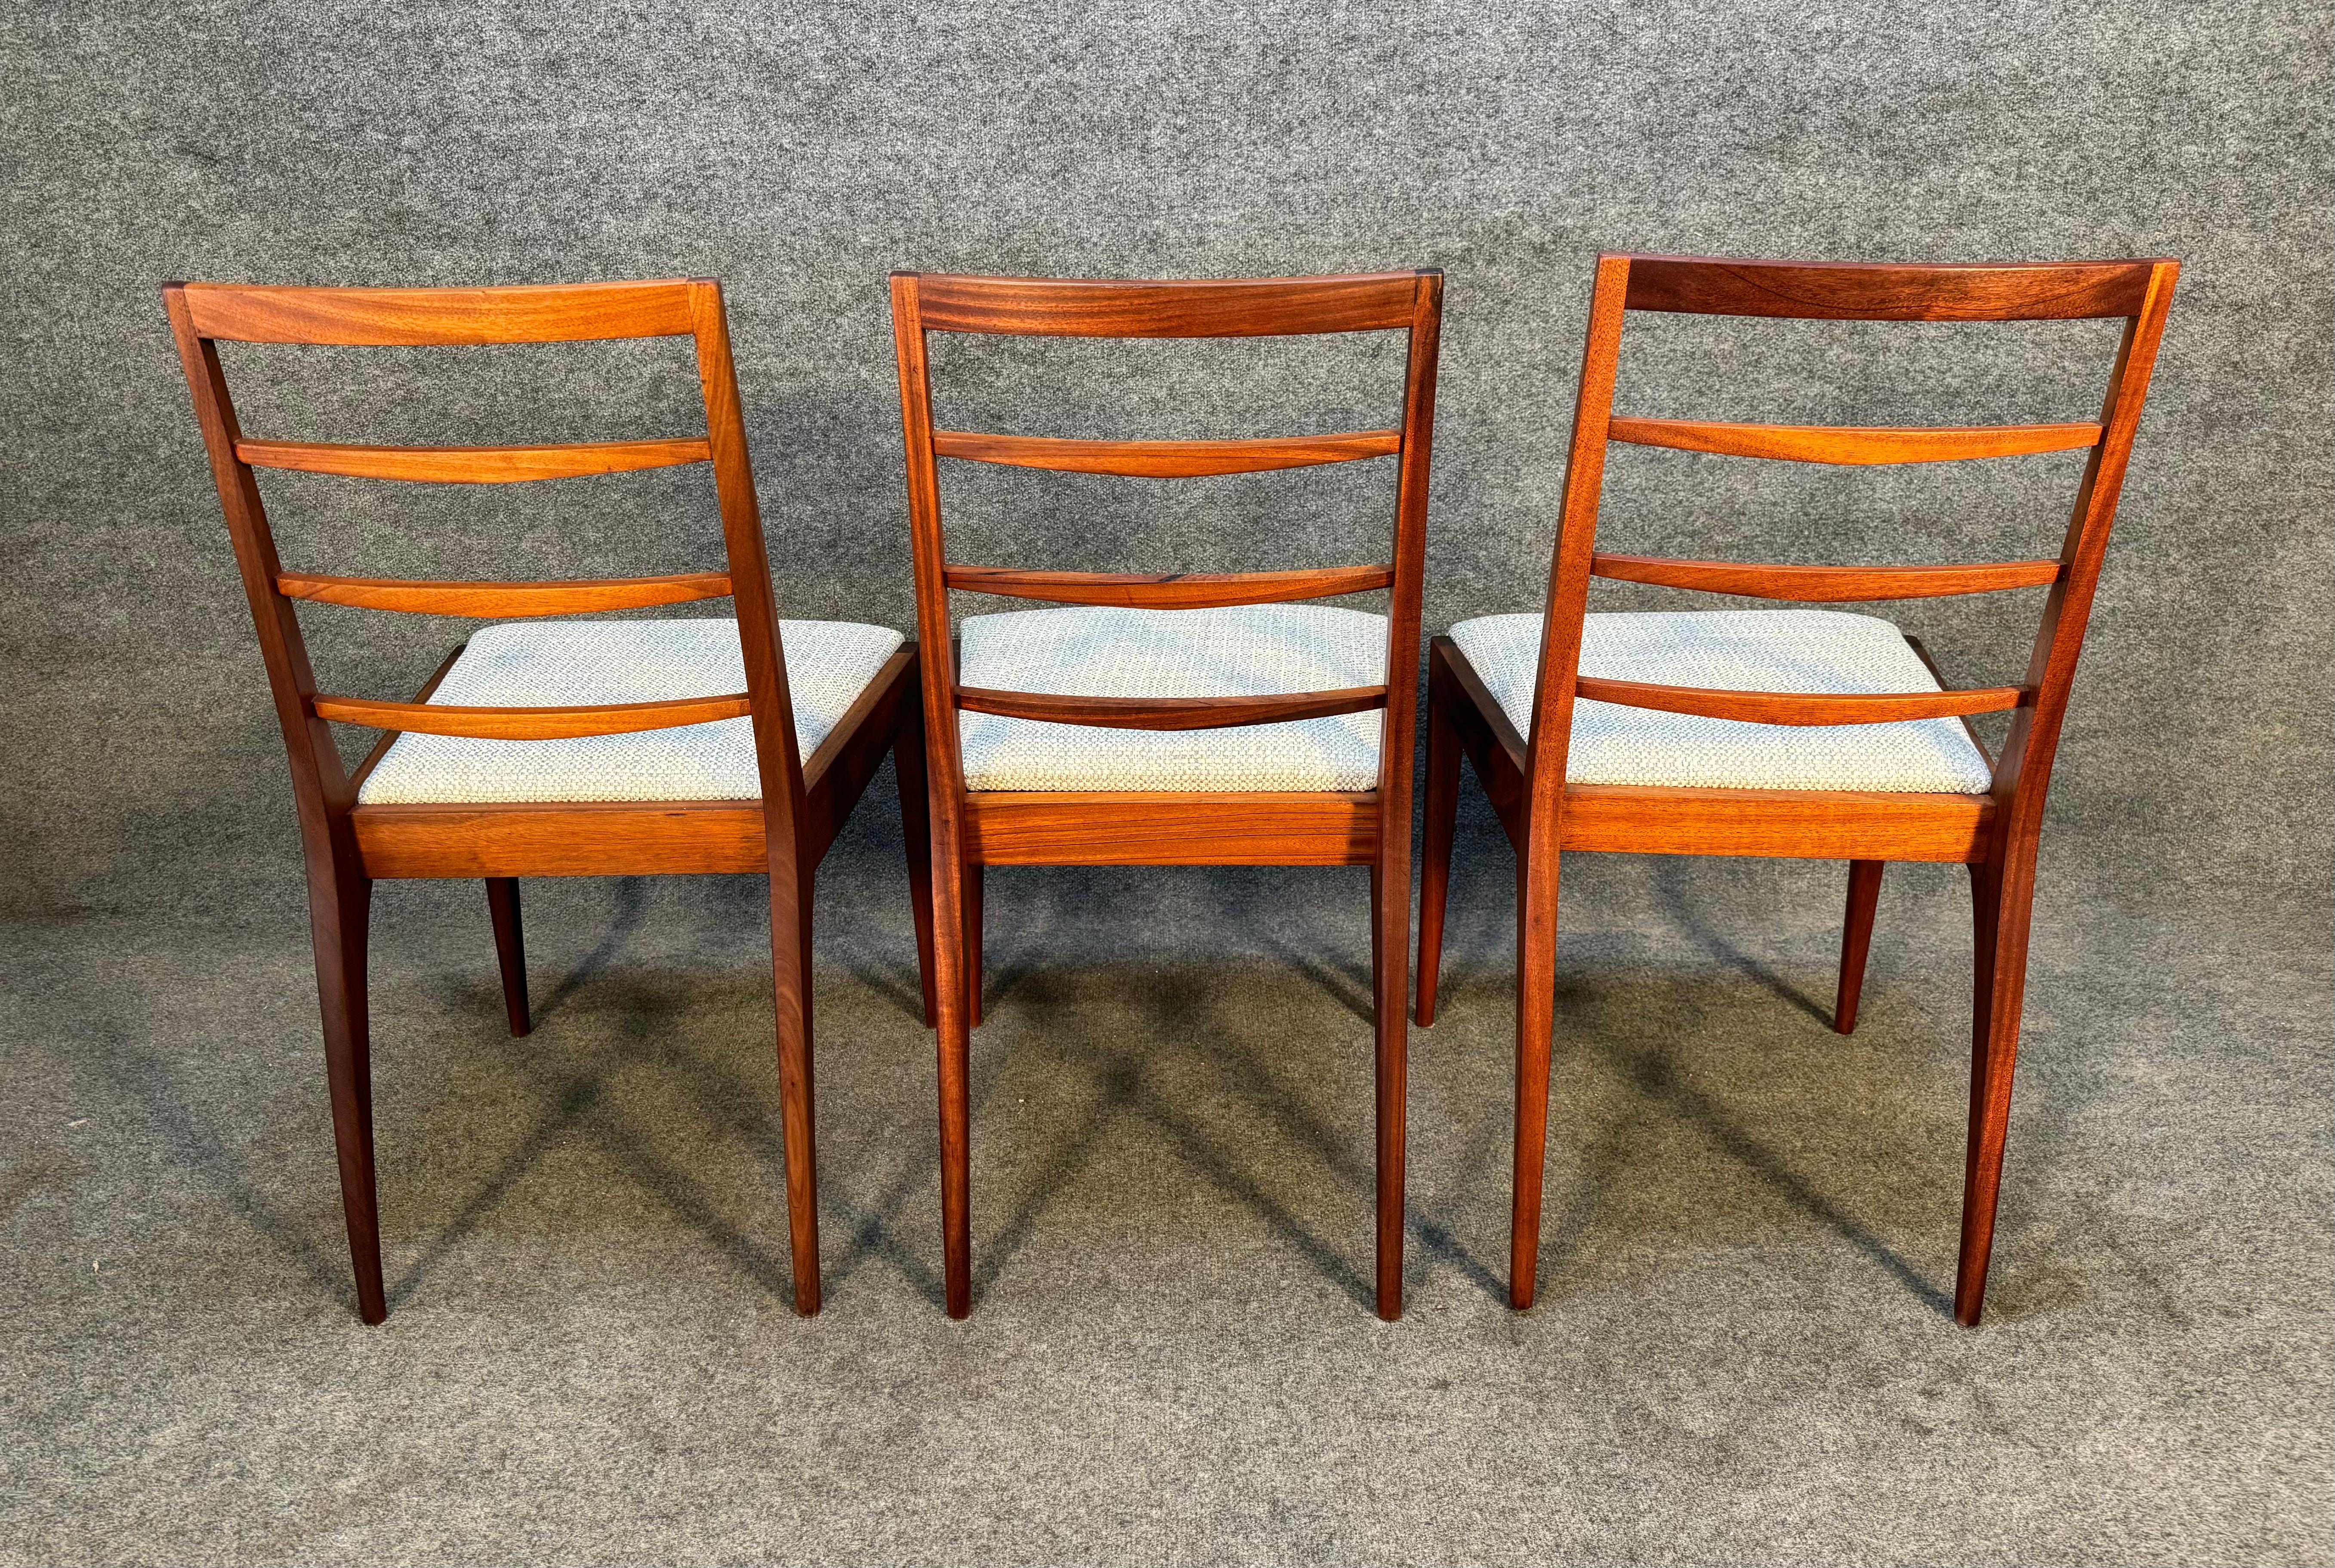 6 Vintage Mid Century Modern Mahogany Dining Chairs by McIntosh In Good Condition For Sale In San Marcos, CA